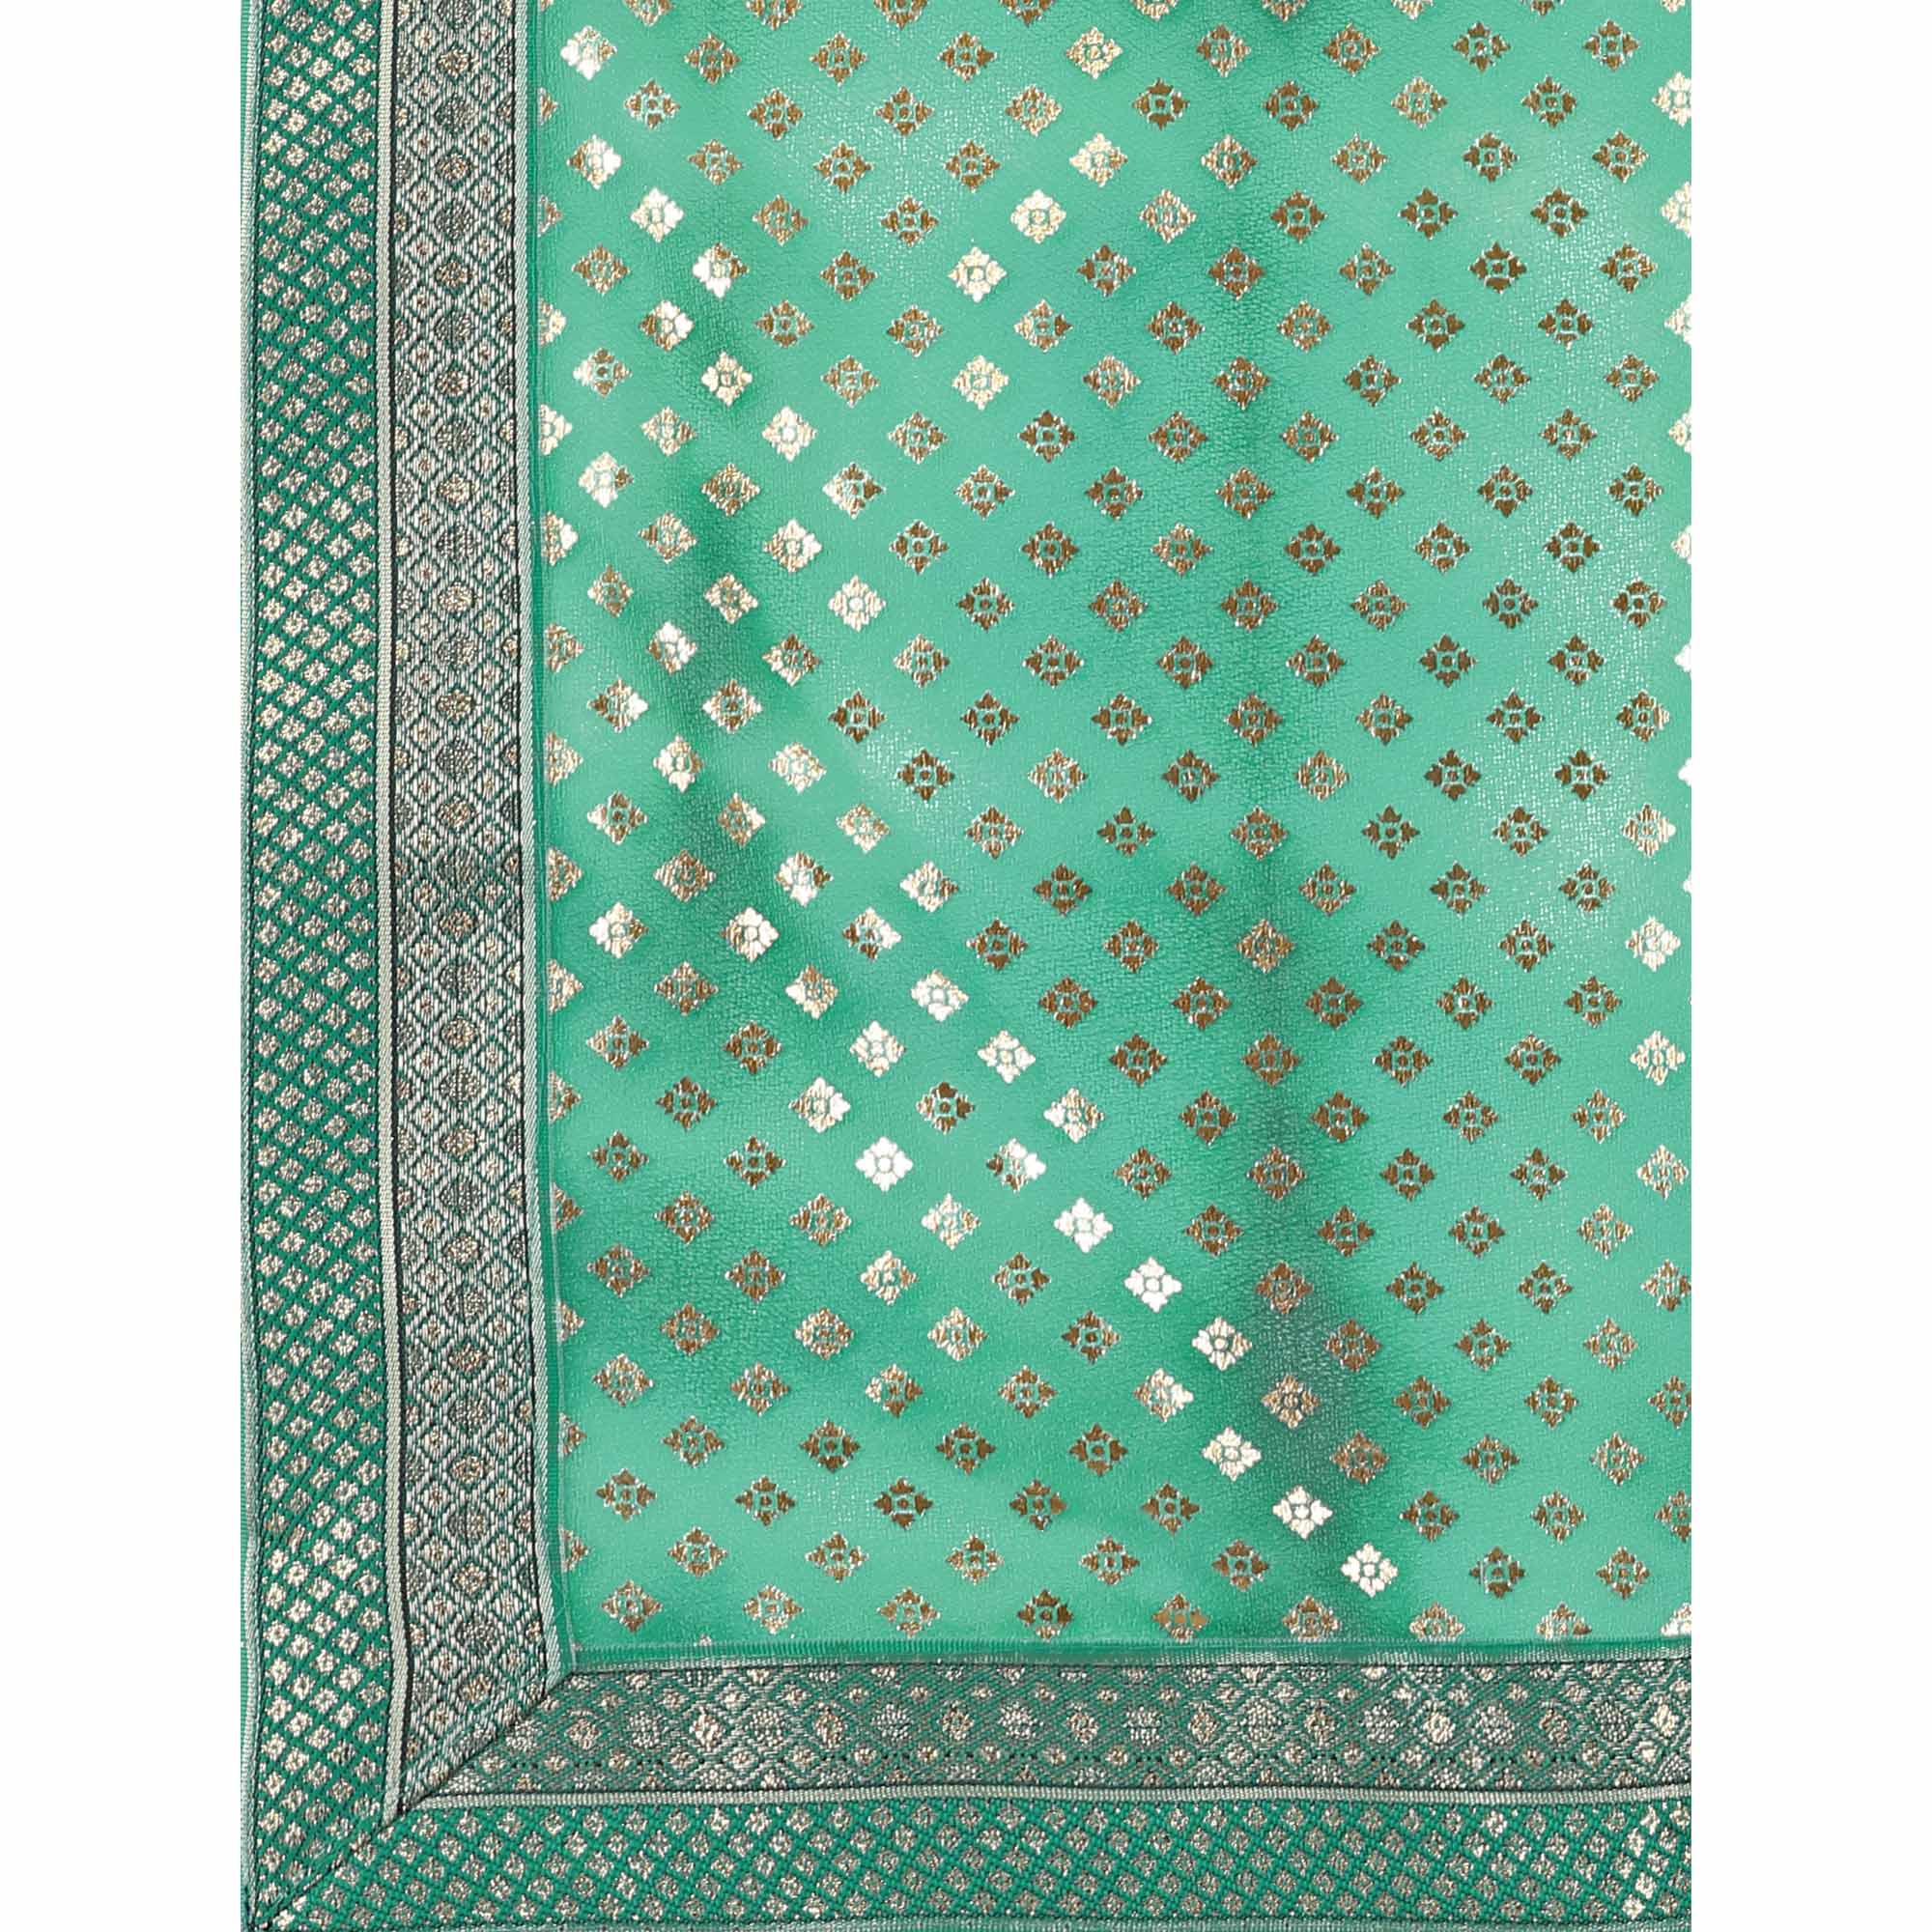 Green Foil Printed Lycra Saree With Lace Border